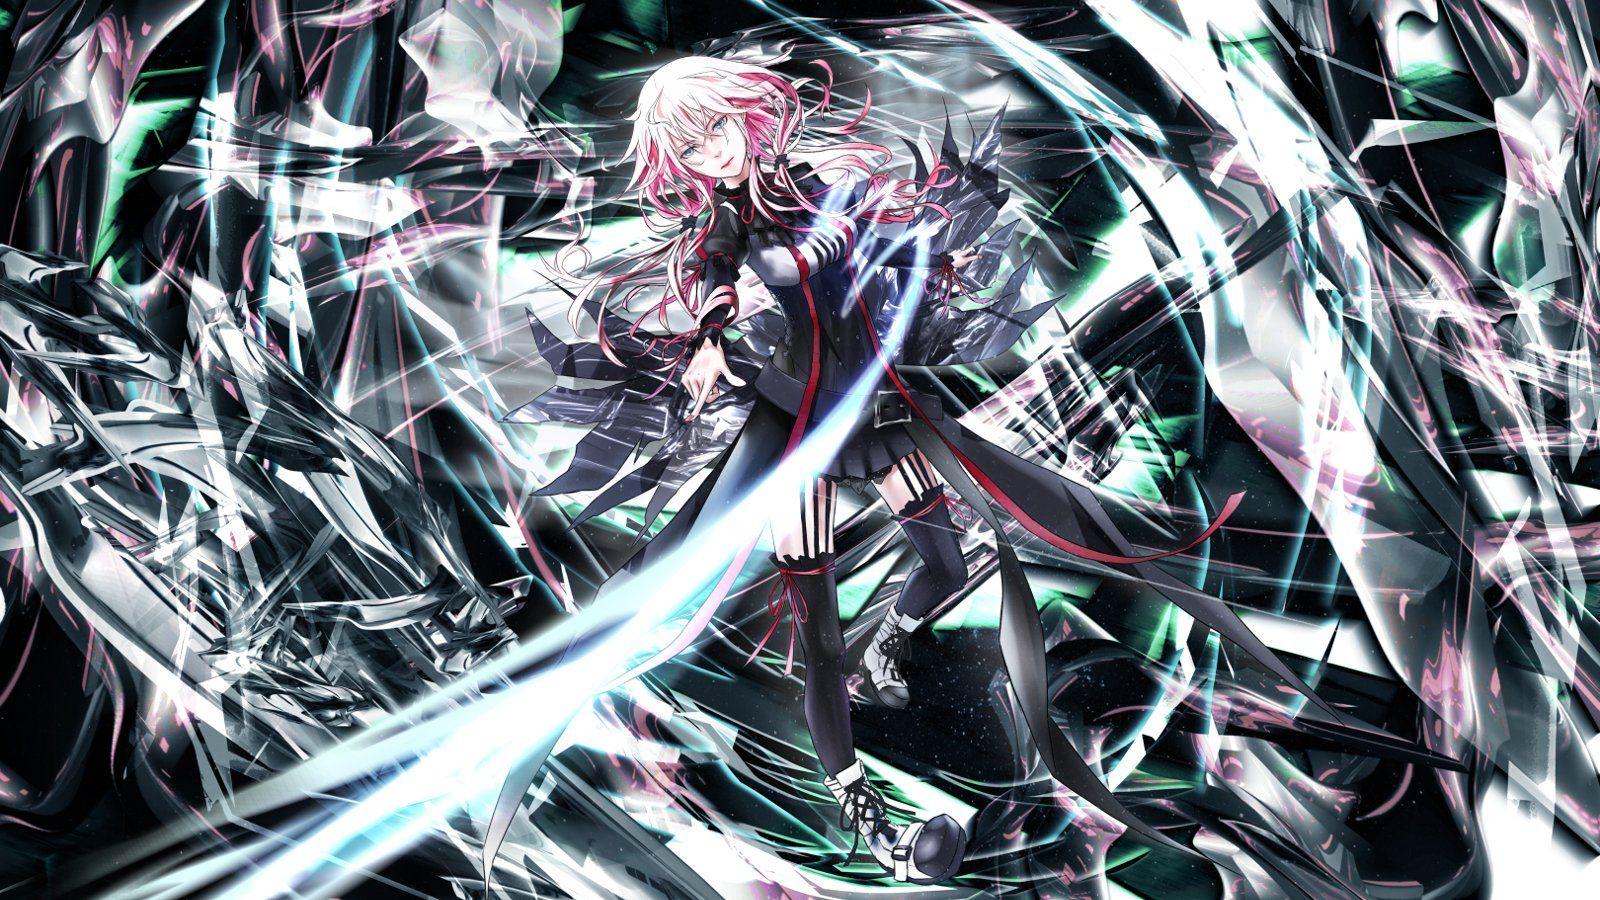 Anime-Guilty Crown wallpaper by vincent1271 - Download on ZEDGE